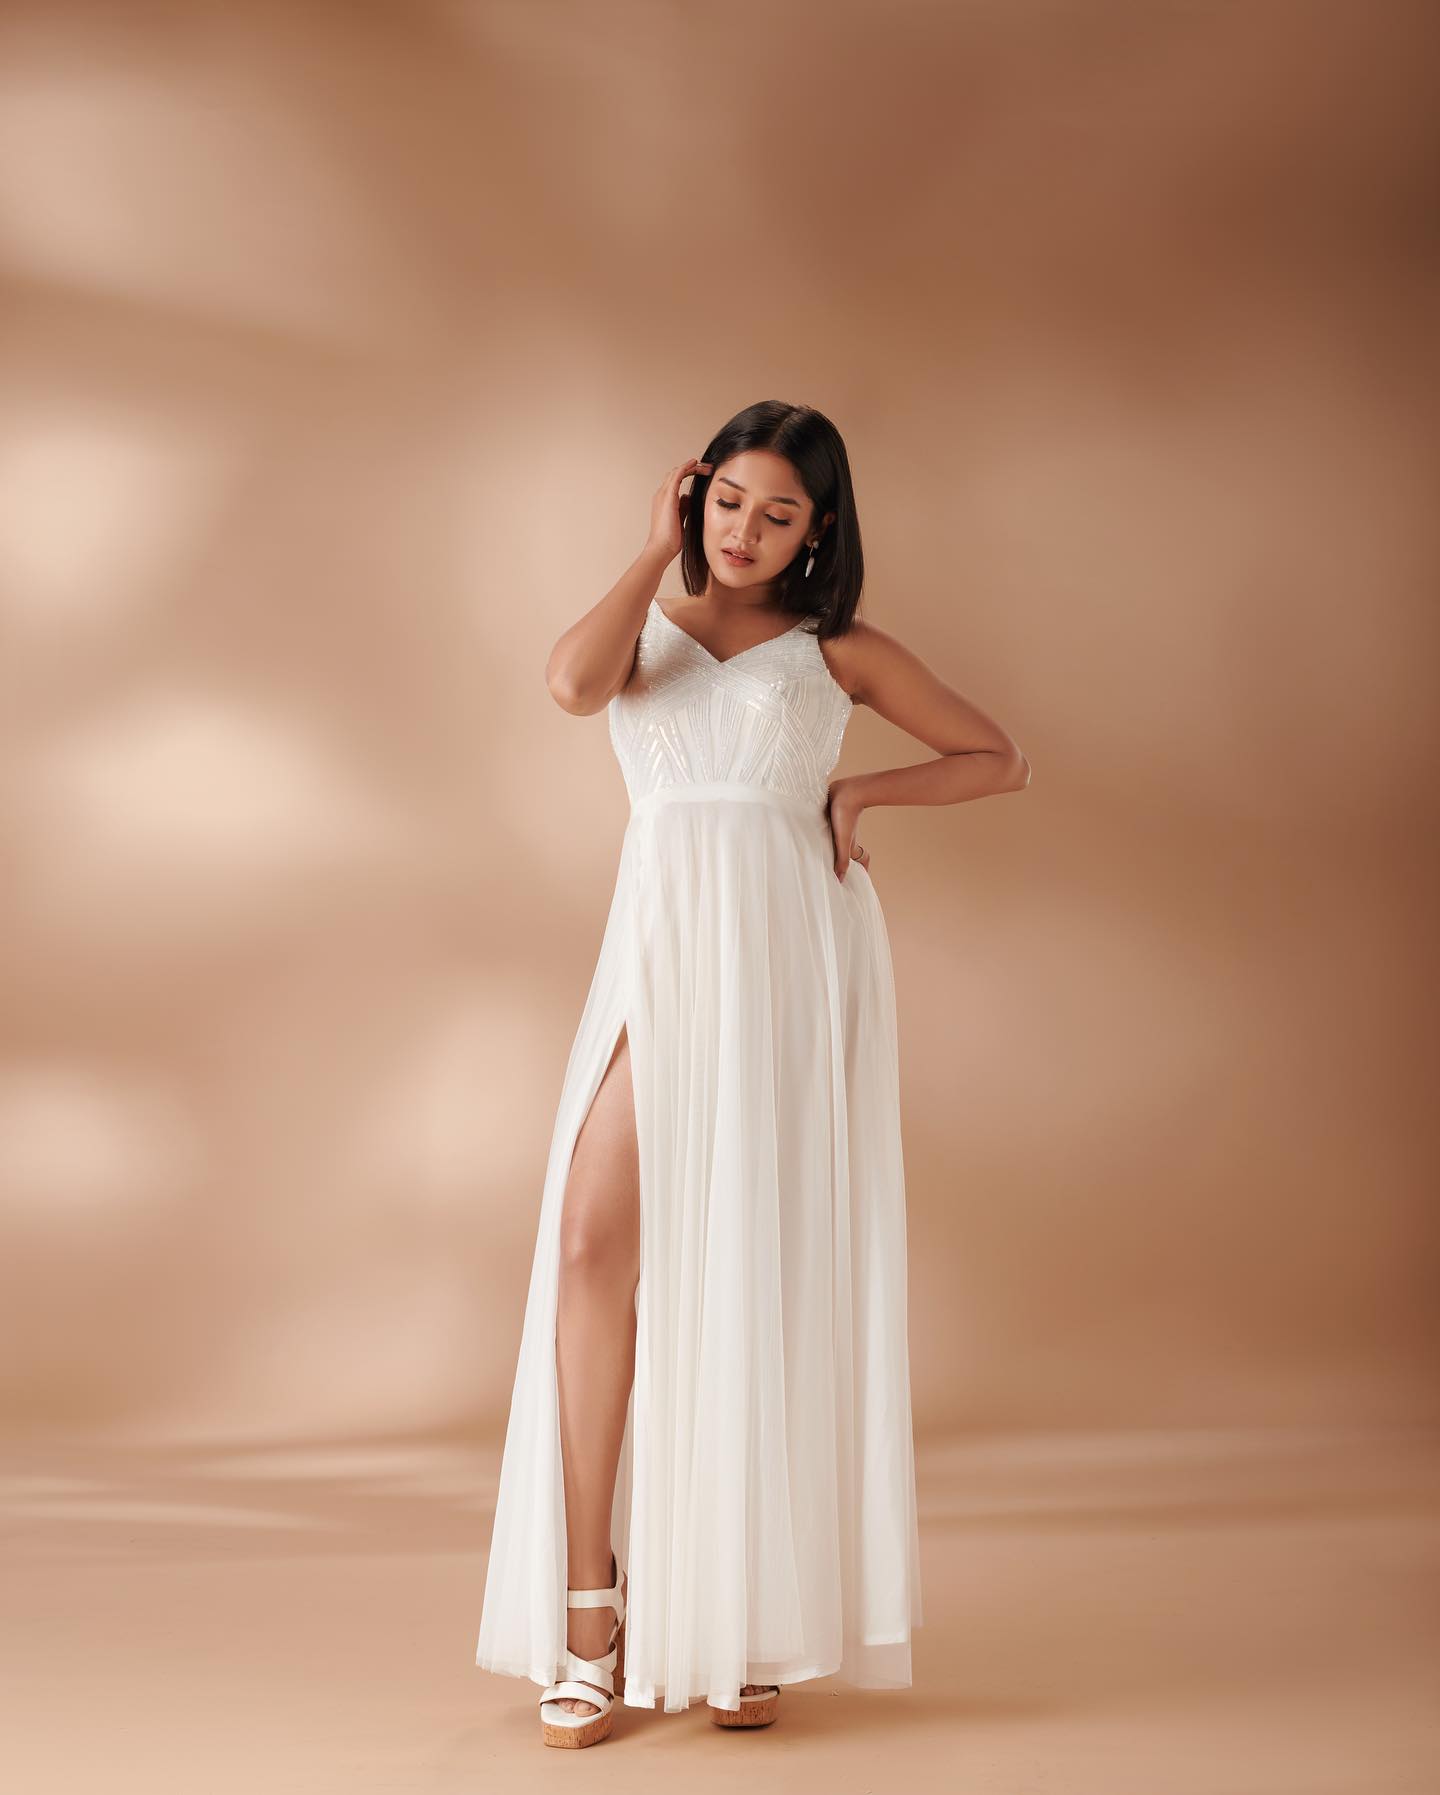 anikha-surendran-in-white-sleeveless-gown-dress-images-003